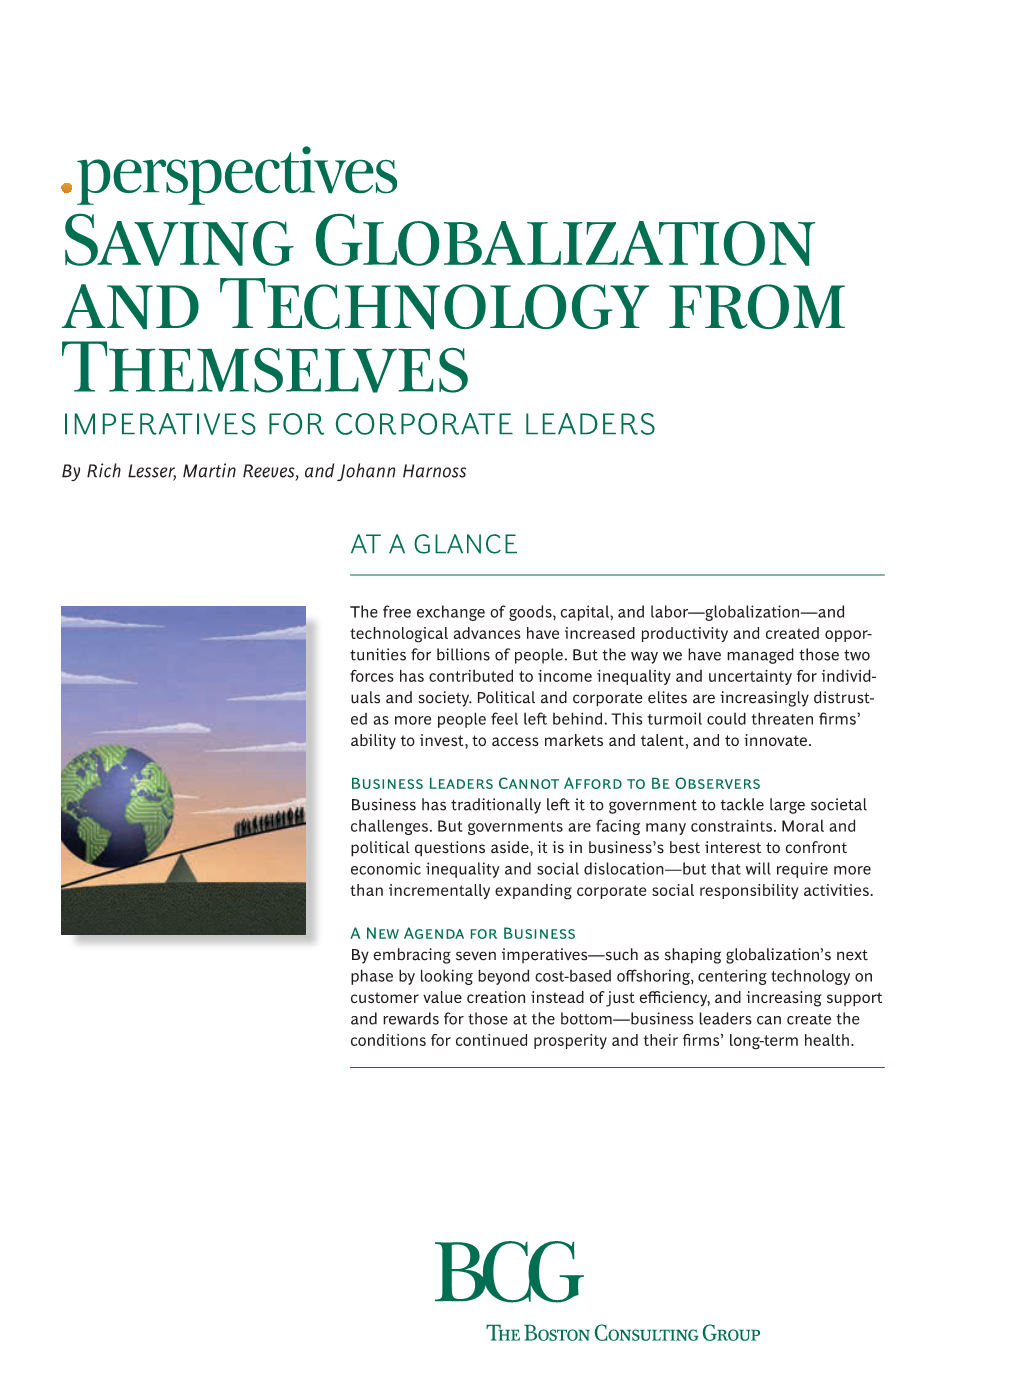 Saving Globalization and Technology from Themselves Imperatives for Corporate Leaders